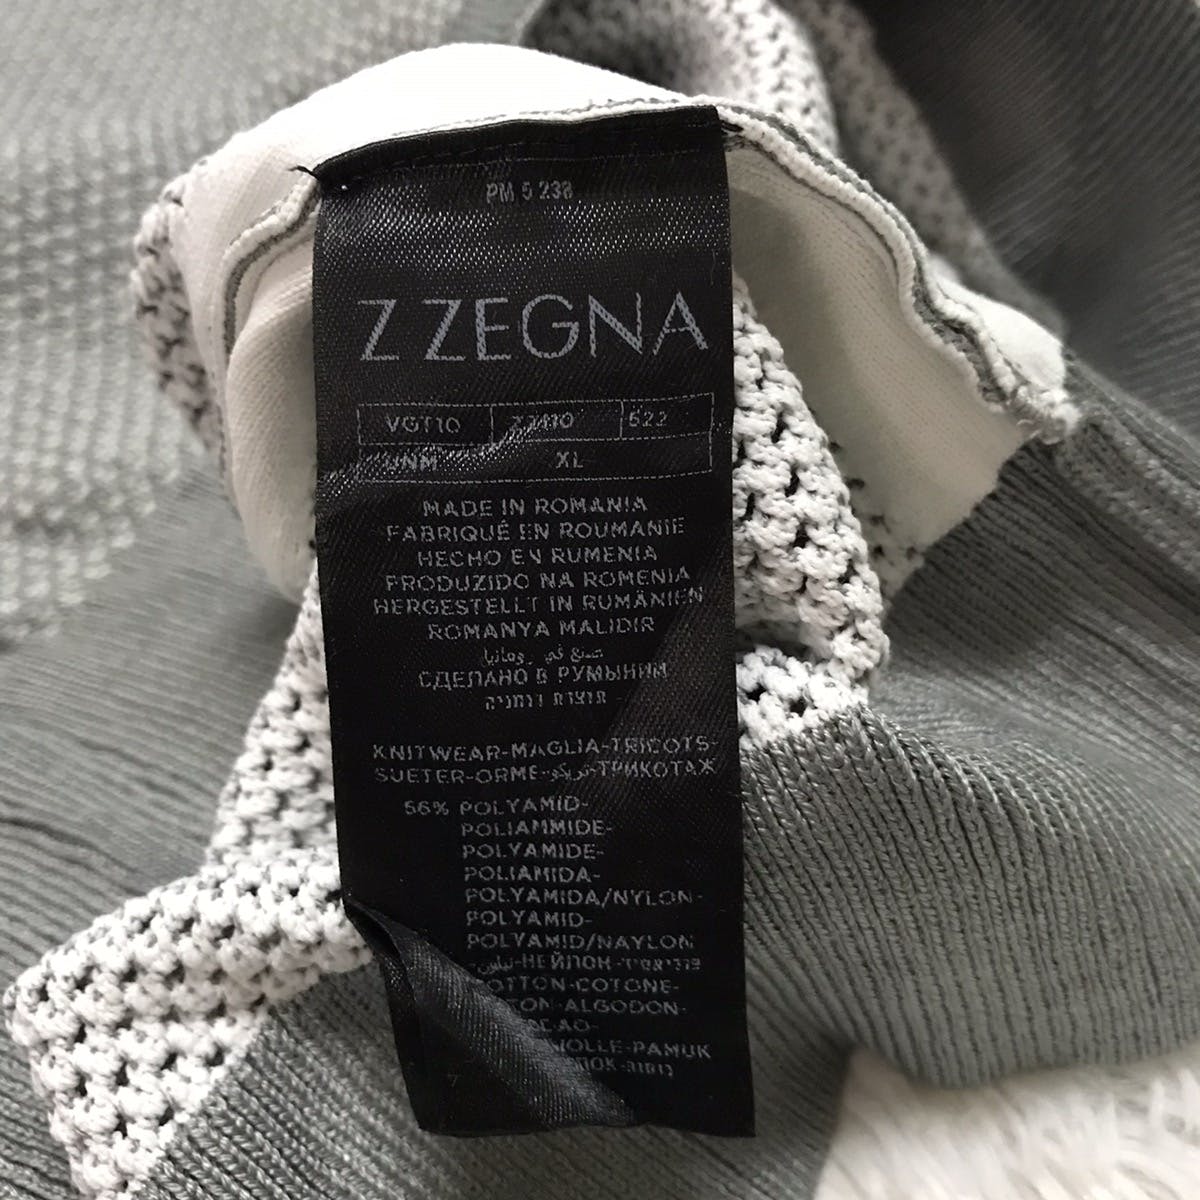 Z Zegna Netting Knitwear Maglia Tricots Made in Romania - 9